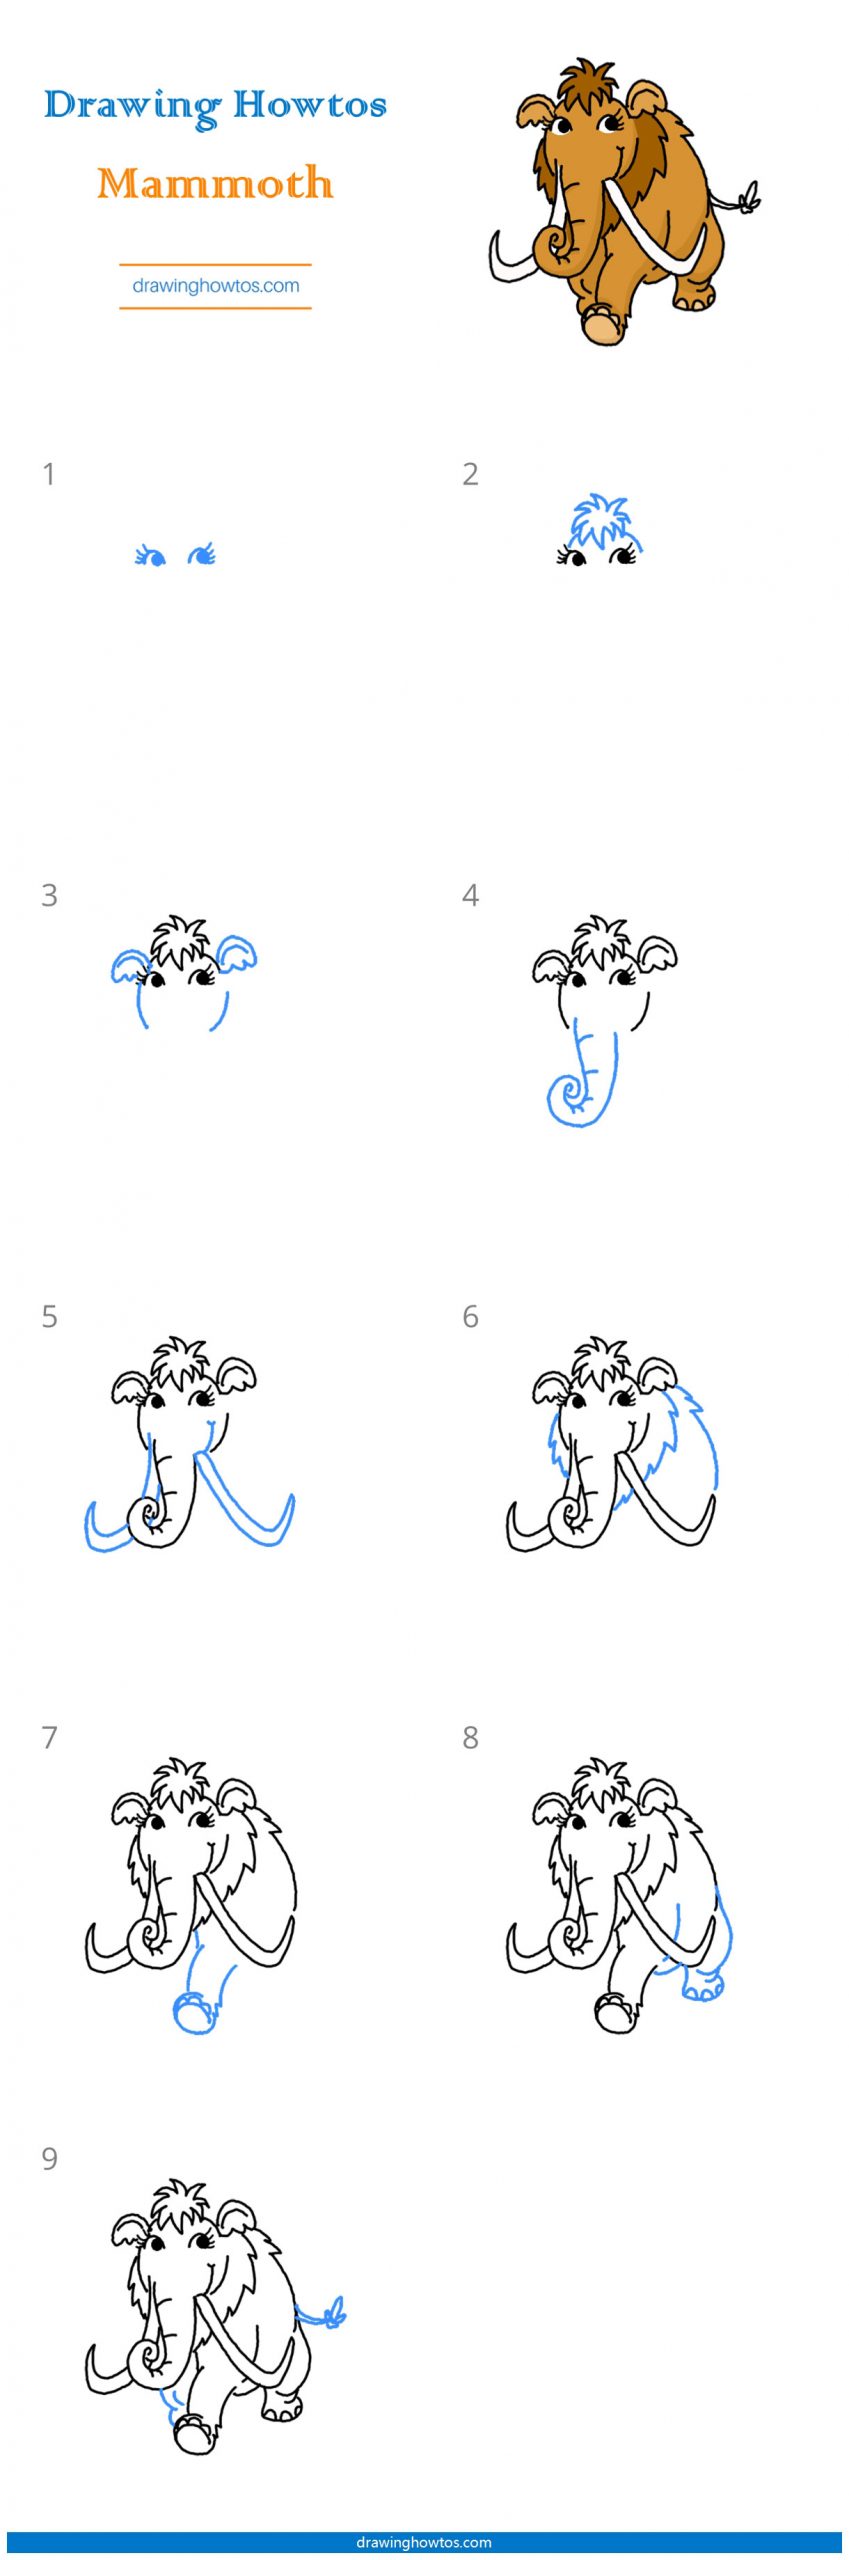 How to Draw a Mammoth Step by Step